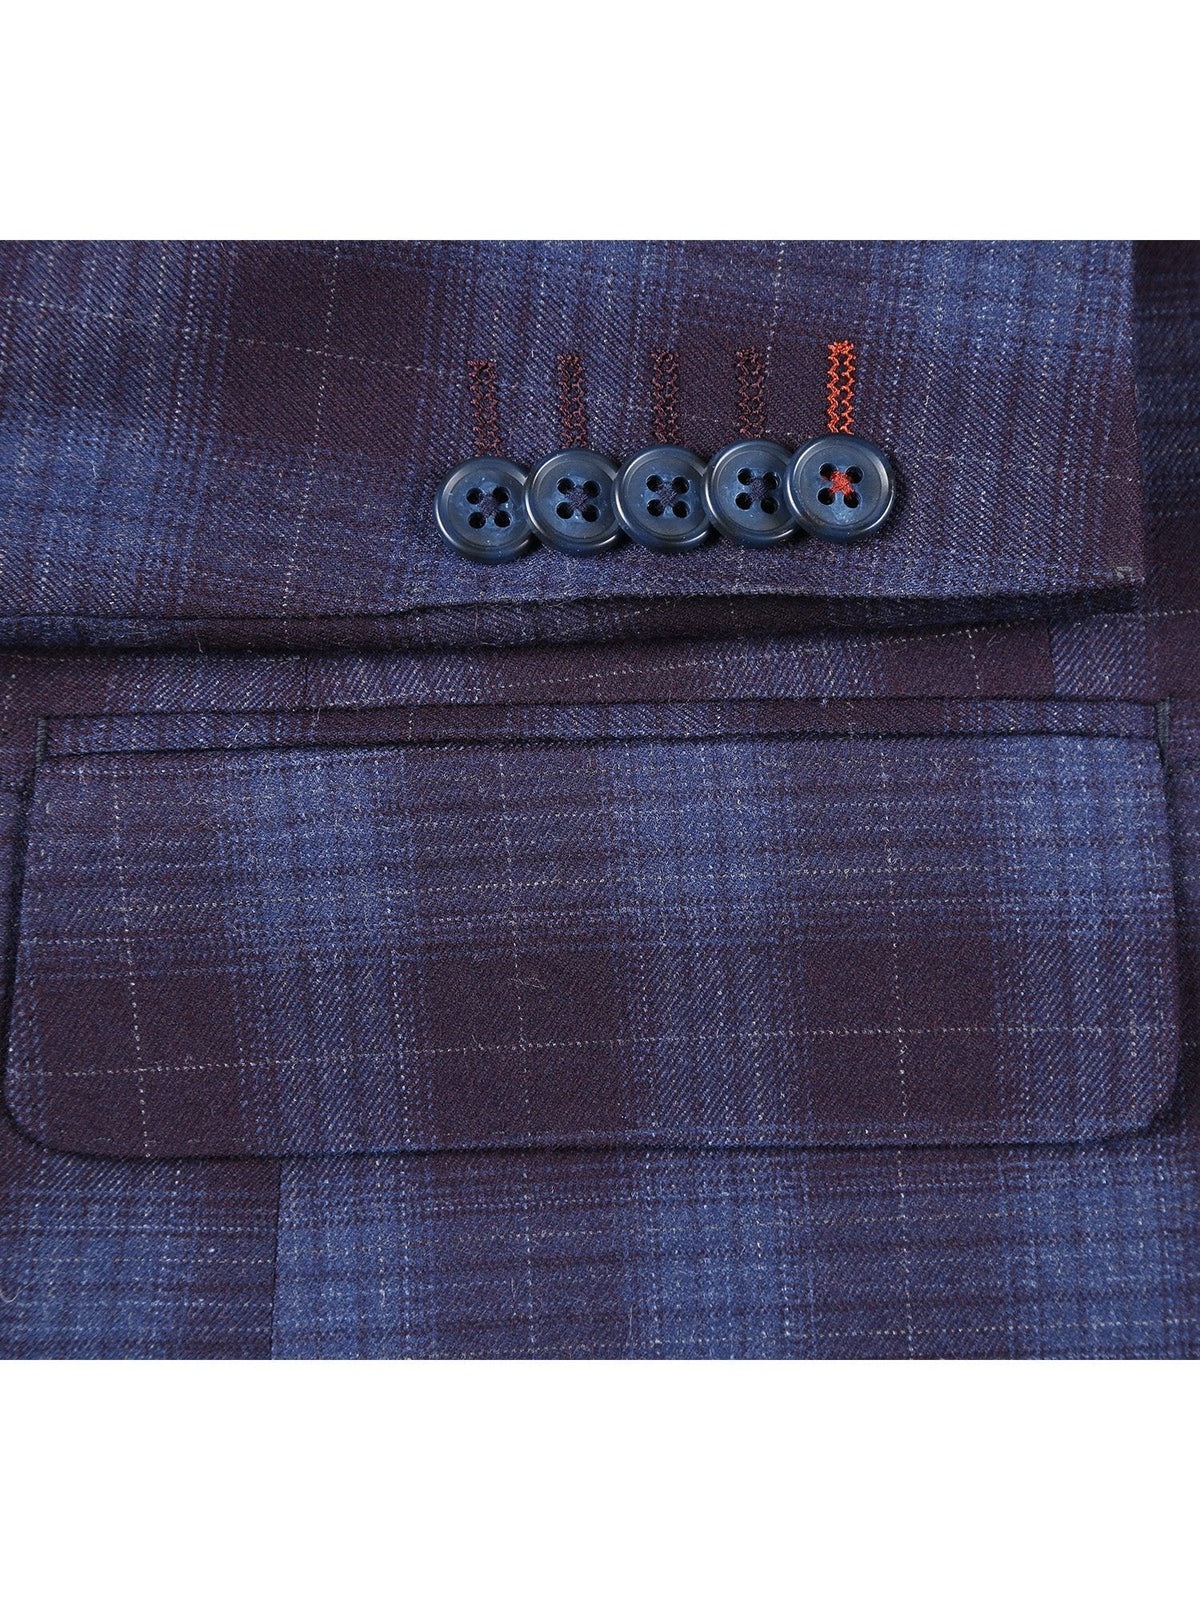 English Laundry Slim Fit Blue with Black Check Wool Suit